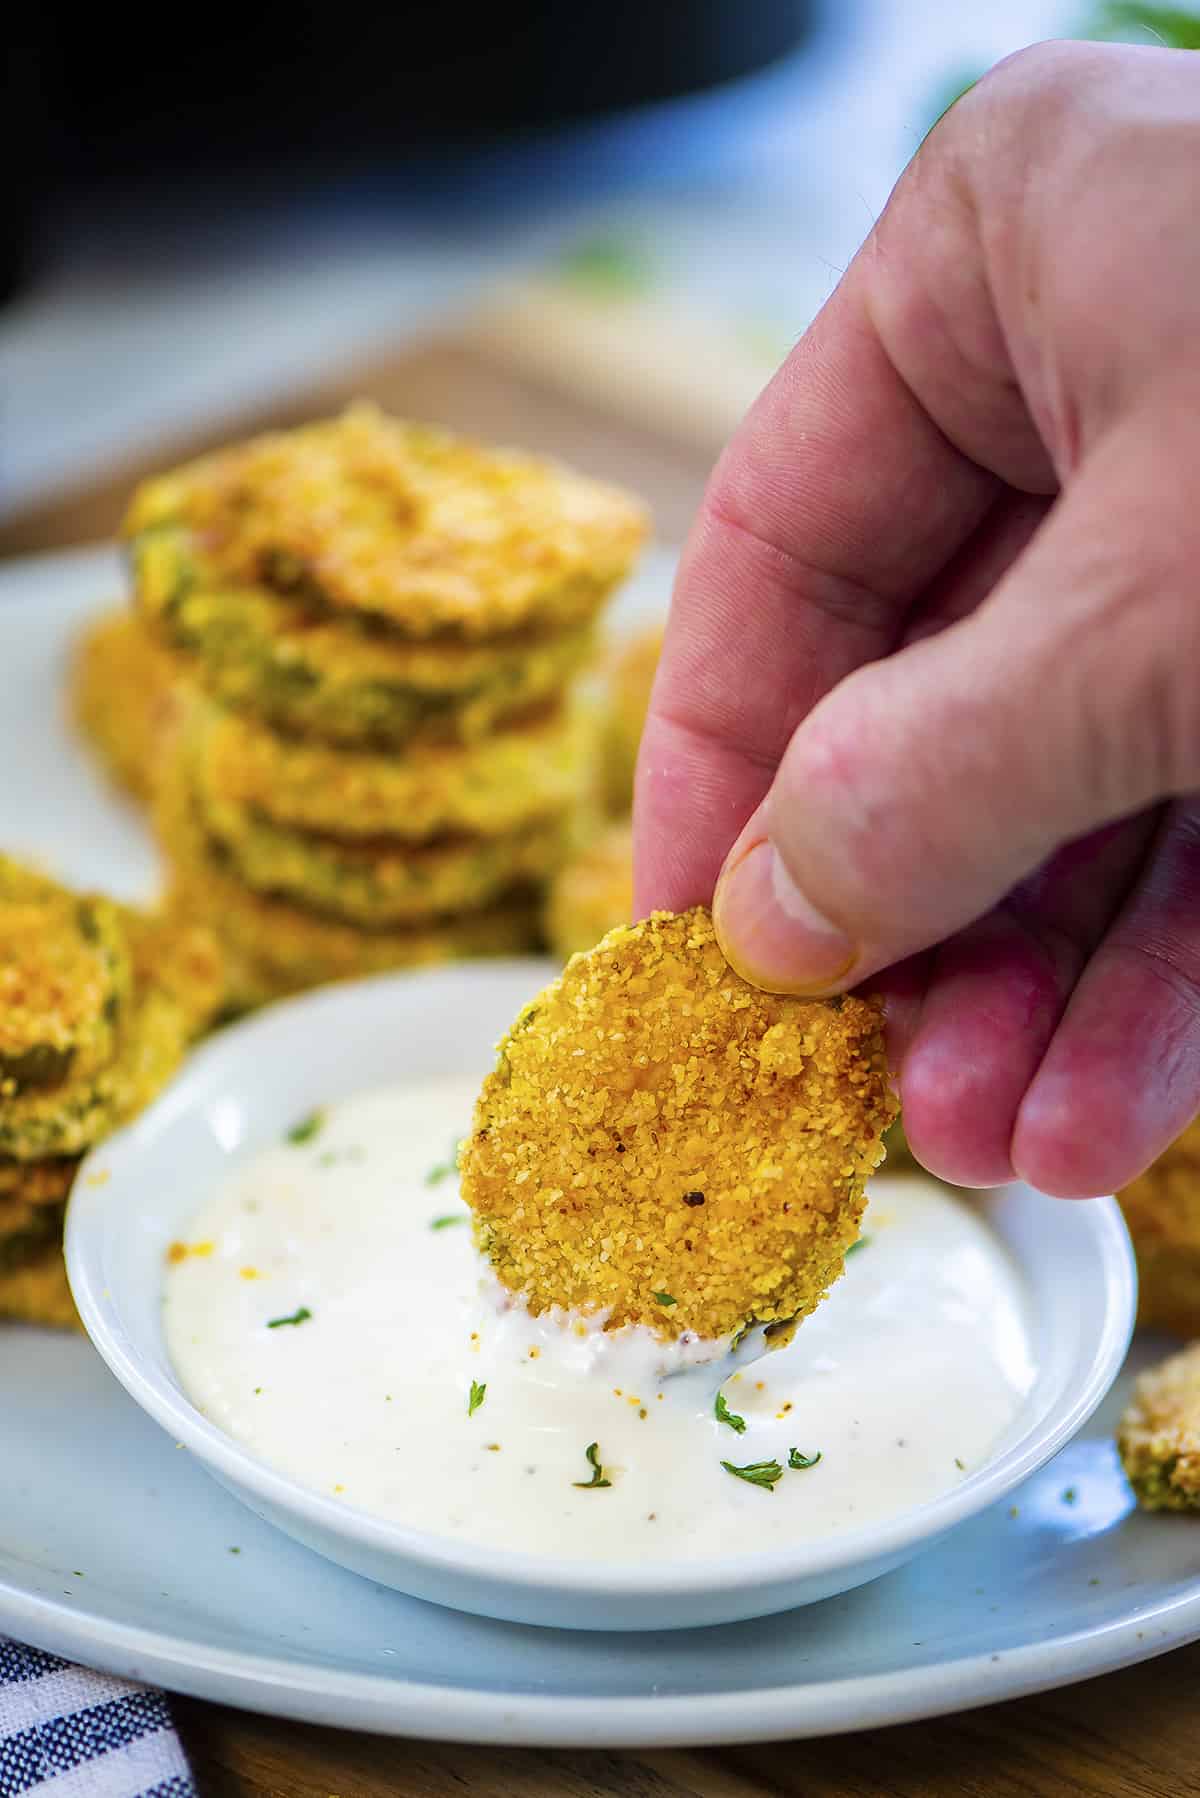 Hand dipping a pickle into ranch dressing.